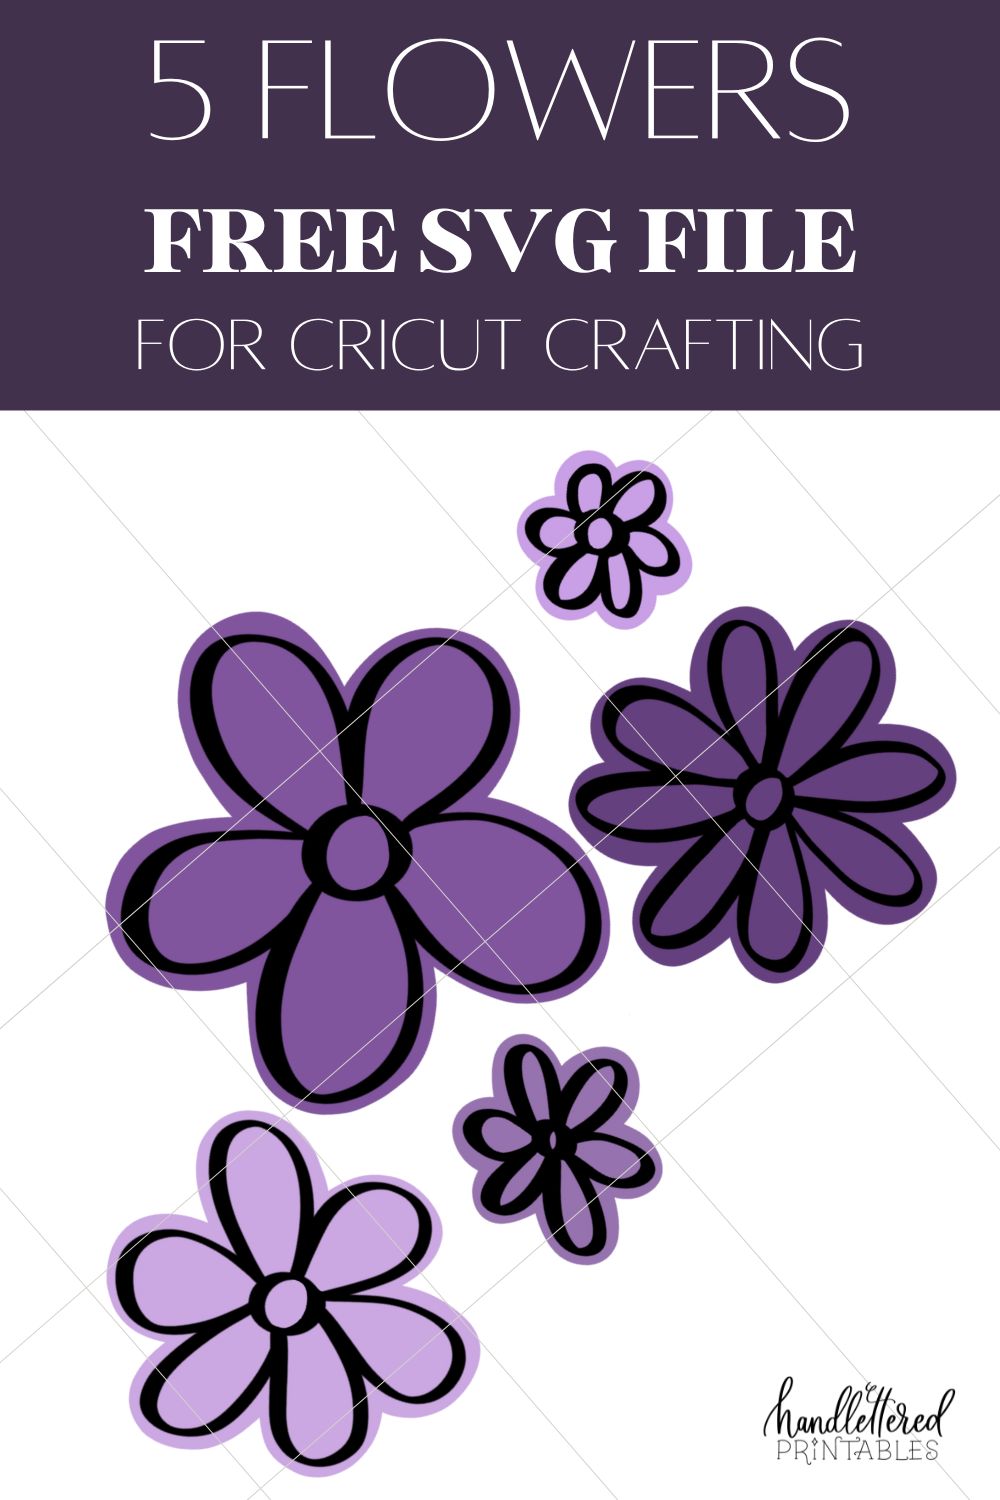 2 Layer cut file of 5 hand drawn flowers (free) shown on a white background Title text reads: Flowers Free SVG File